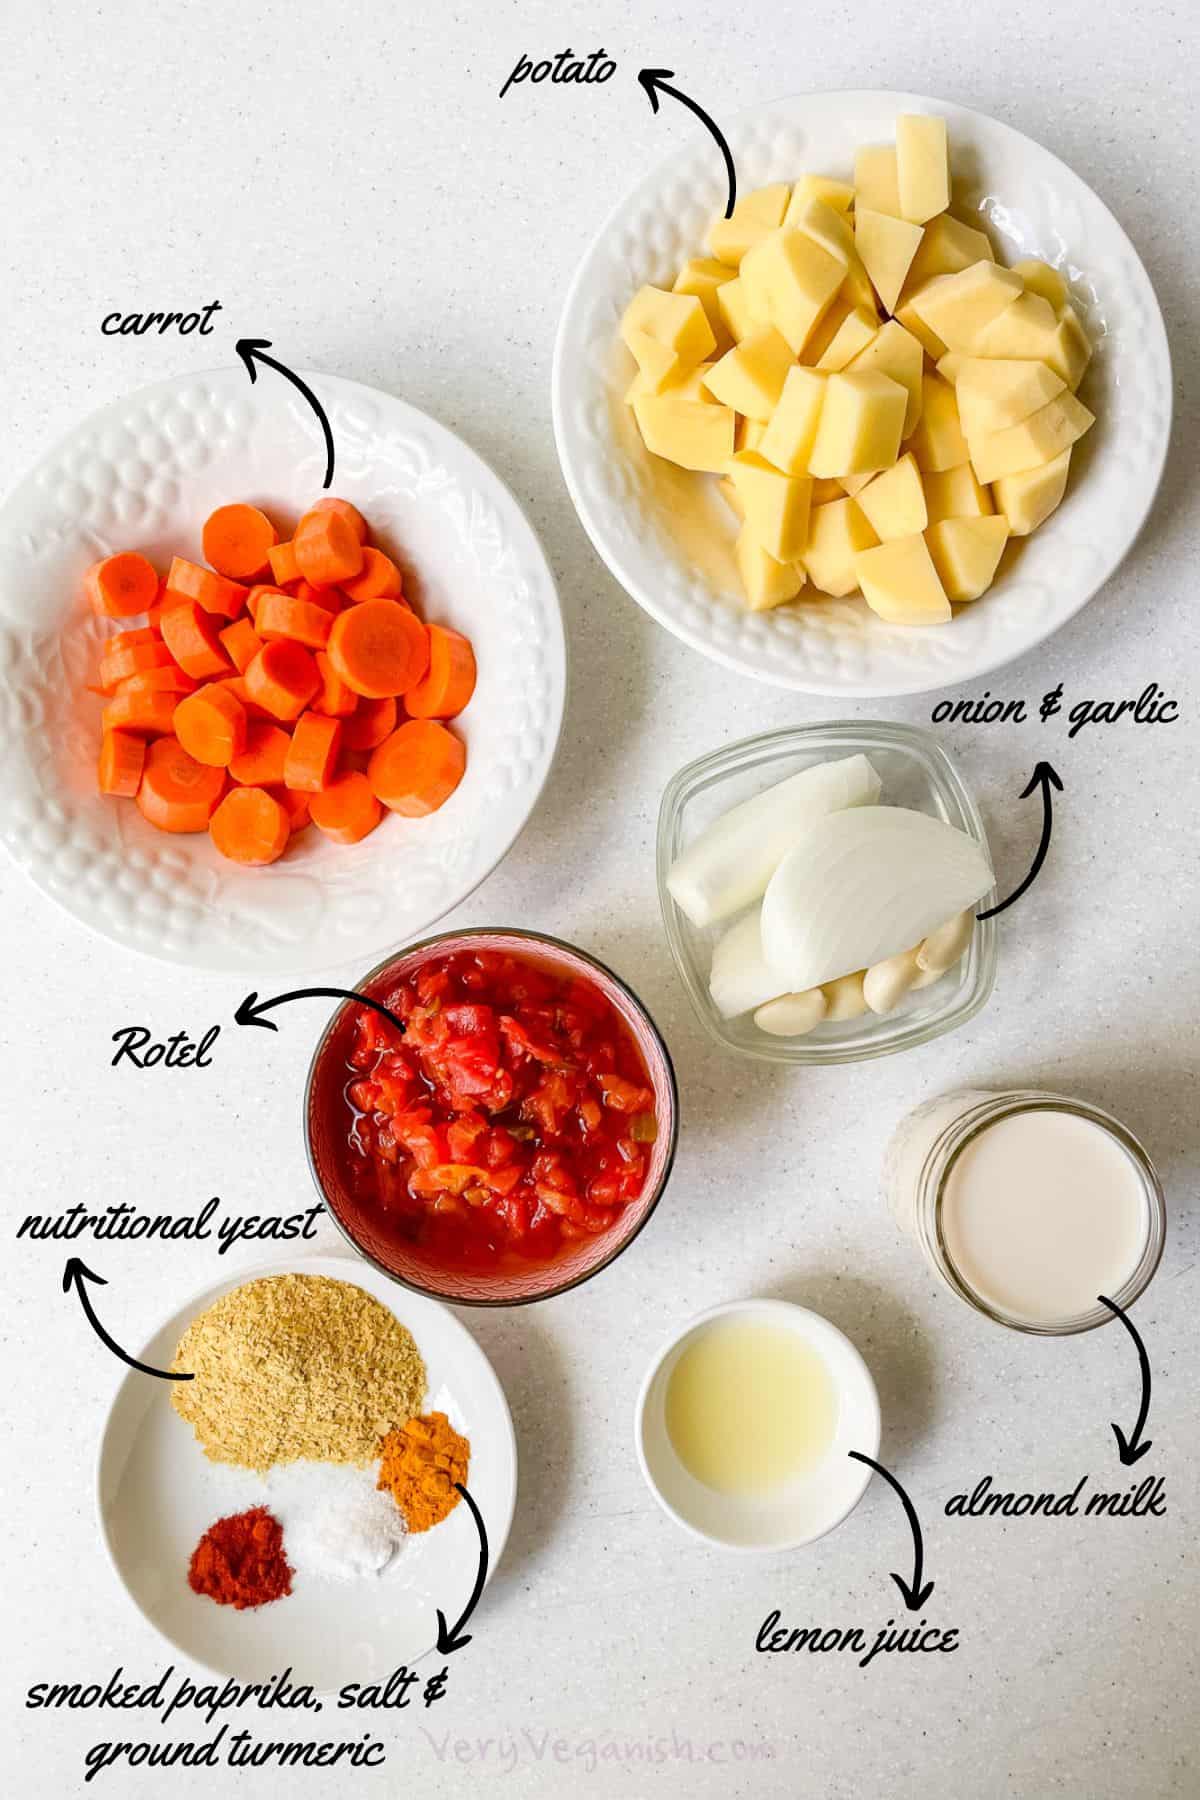 Ingredients laid out for vegan potato carrot nacho cheese rotel dip: cubed potato, sliced carrot, onion slices, garlic cloves, rotel, almond milk, lemon juice, nutritional yeast, smoked paprika, salt and ground turmeric